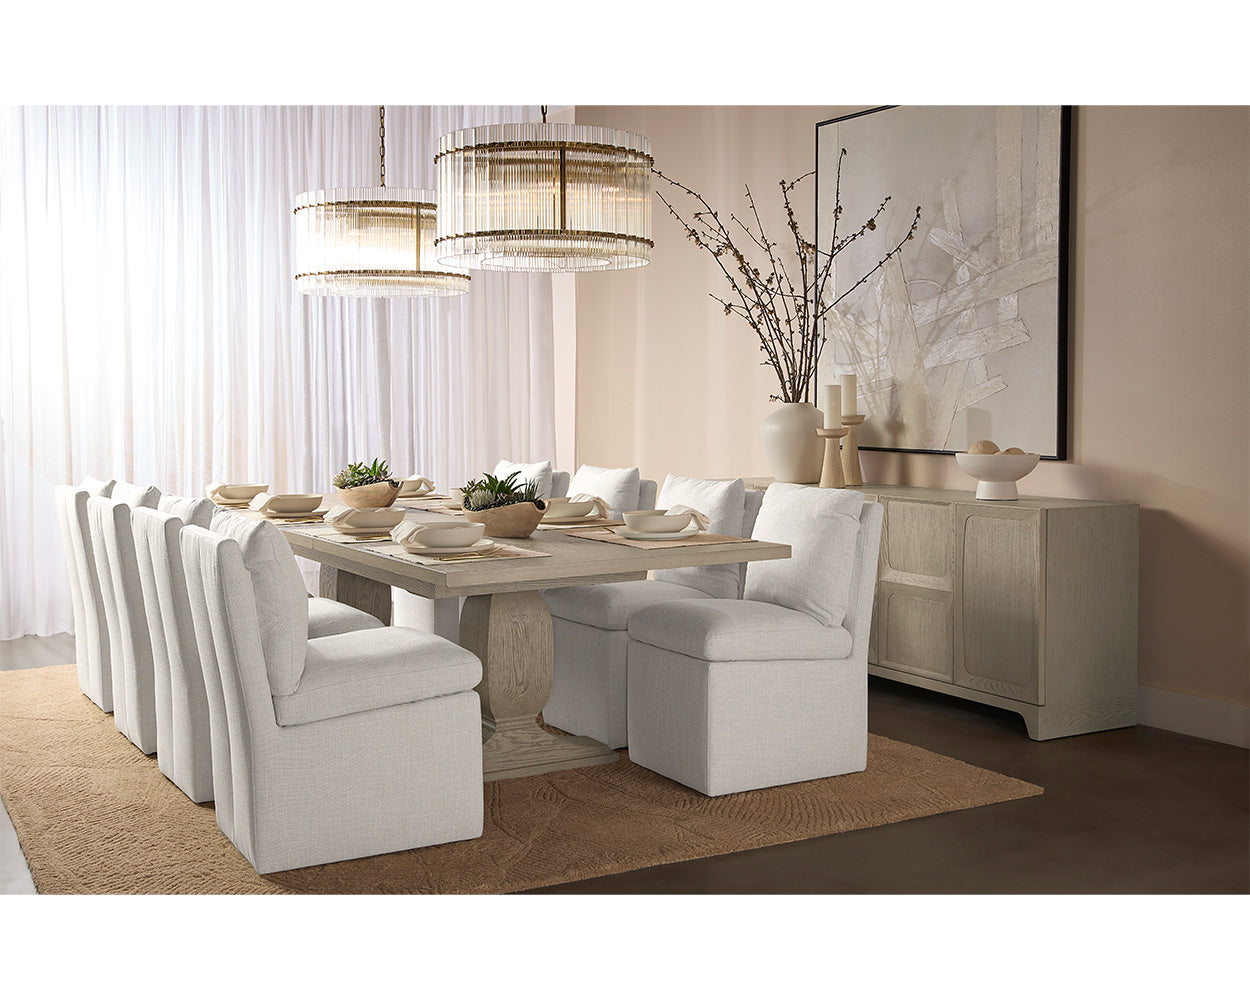 Rhaenyra Extension Dining Table - 86" to 120"